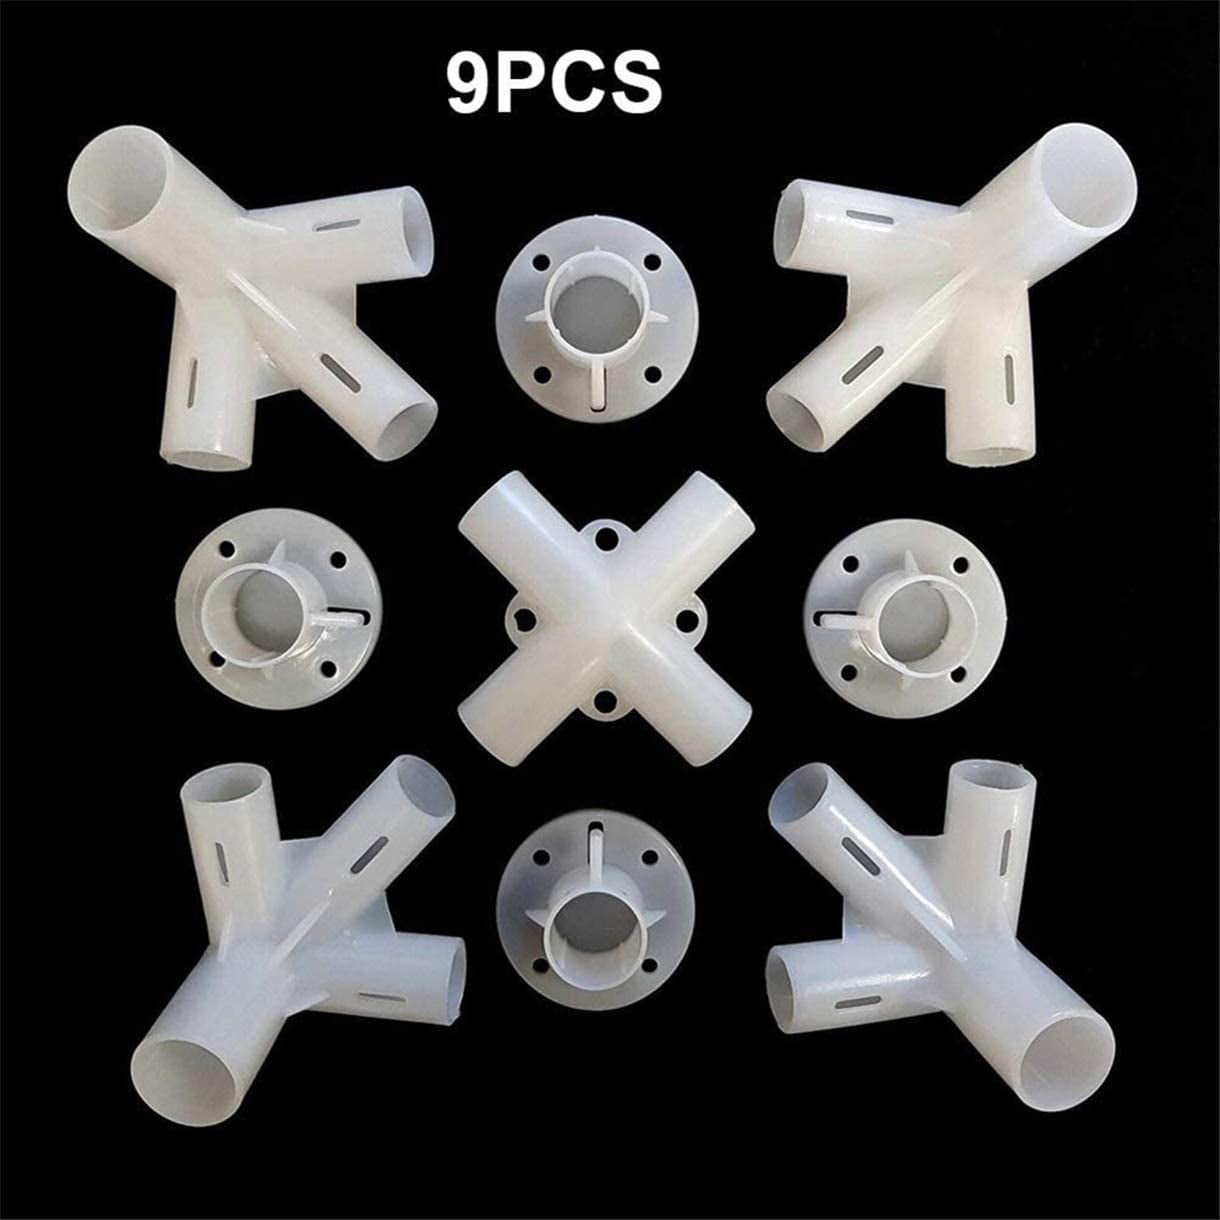 JKHK Spare Parts for 3x3m Gazebo Awning Tent Feet Corner Center Connector（25/19mm）